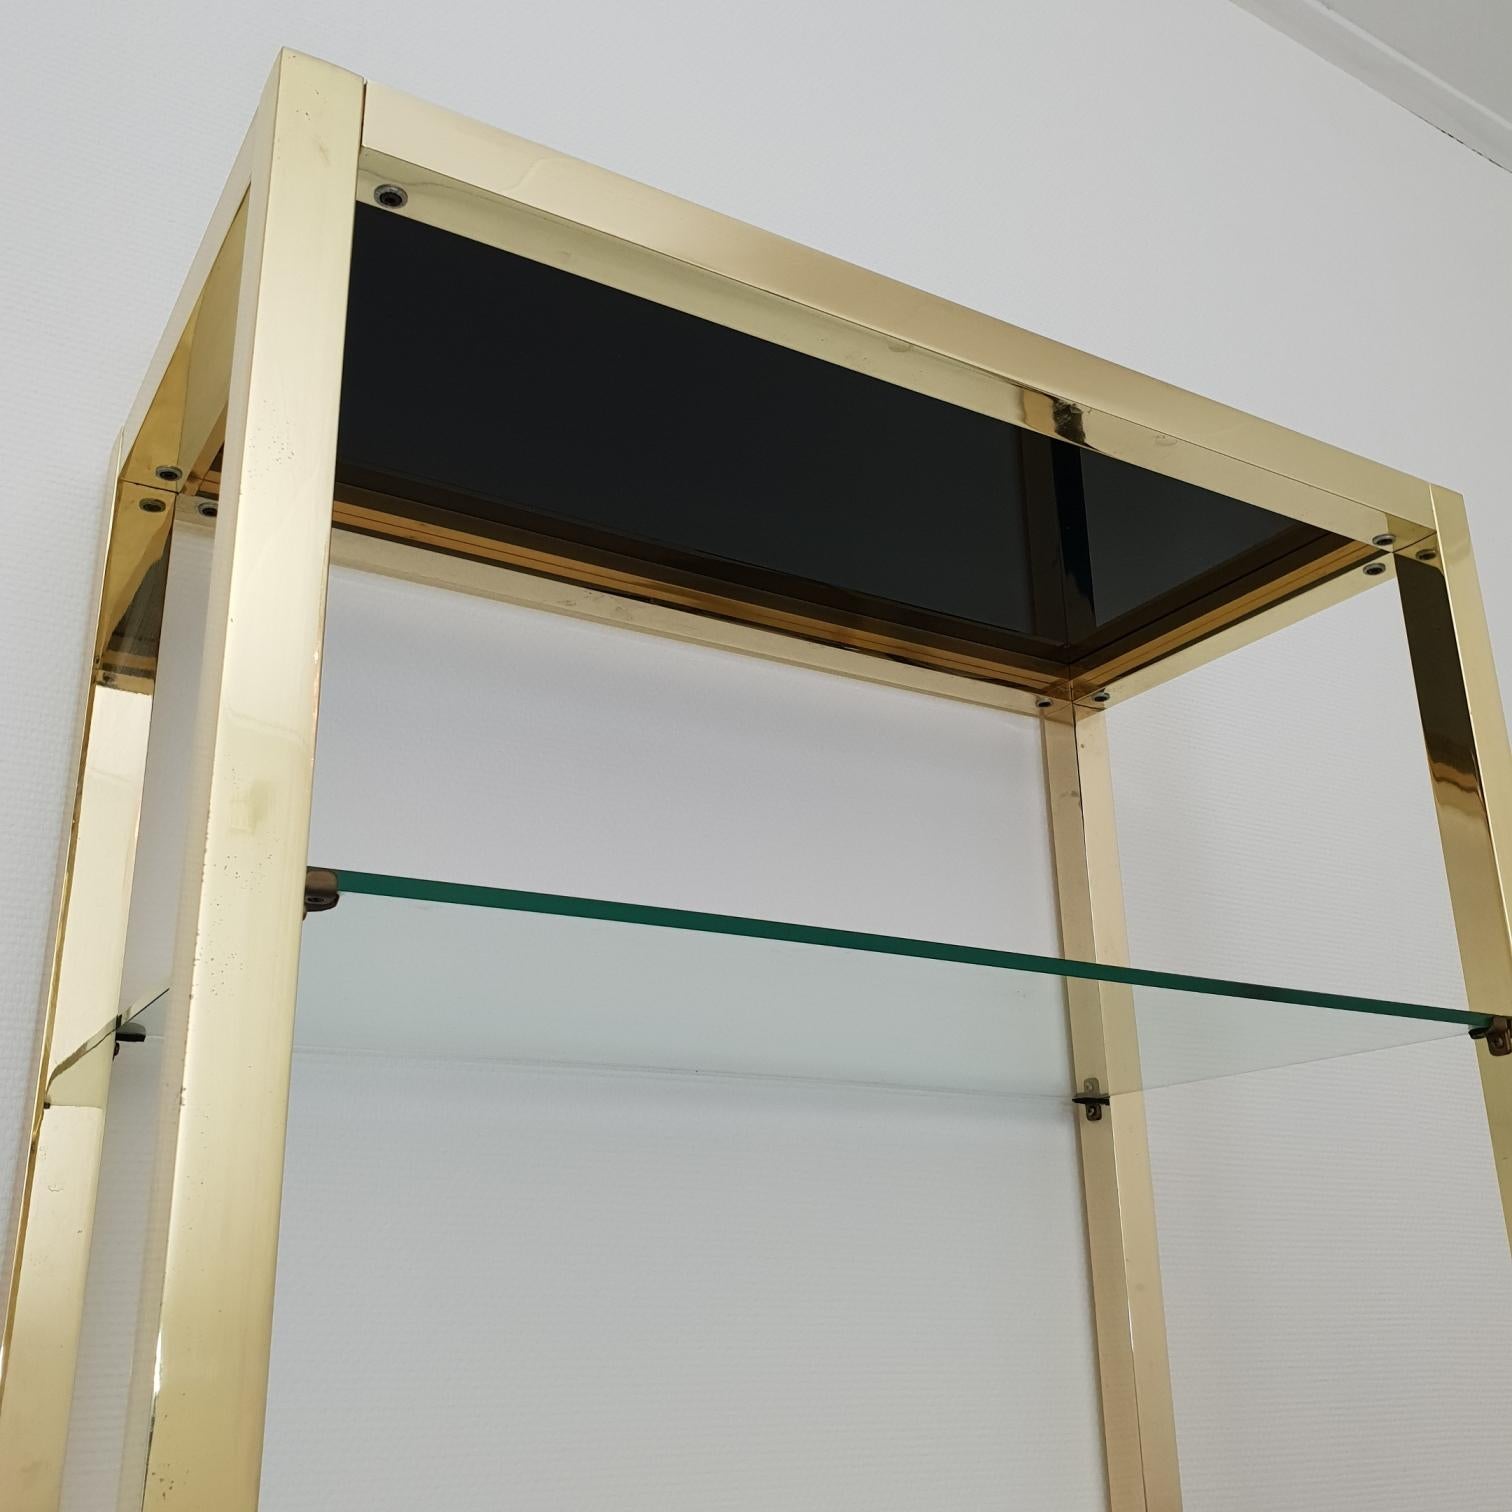 Blackened Italian Mid-Century Modern Gold Plated Shelving Unit Étagère, 1970s For Sale